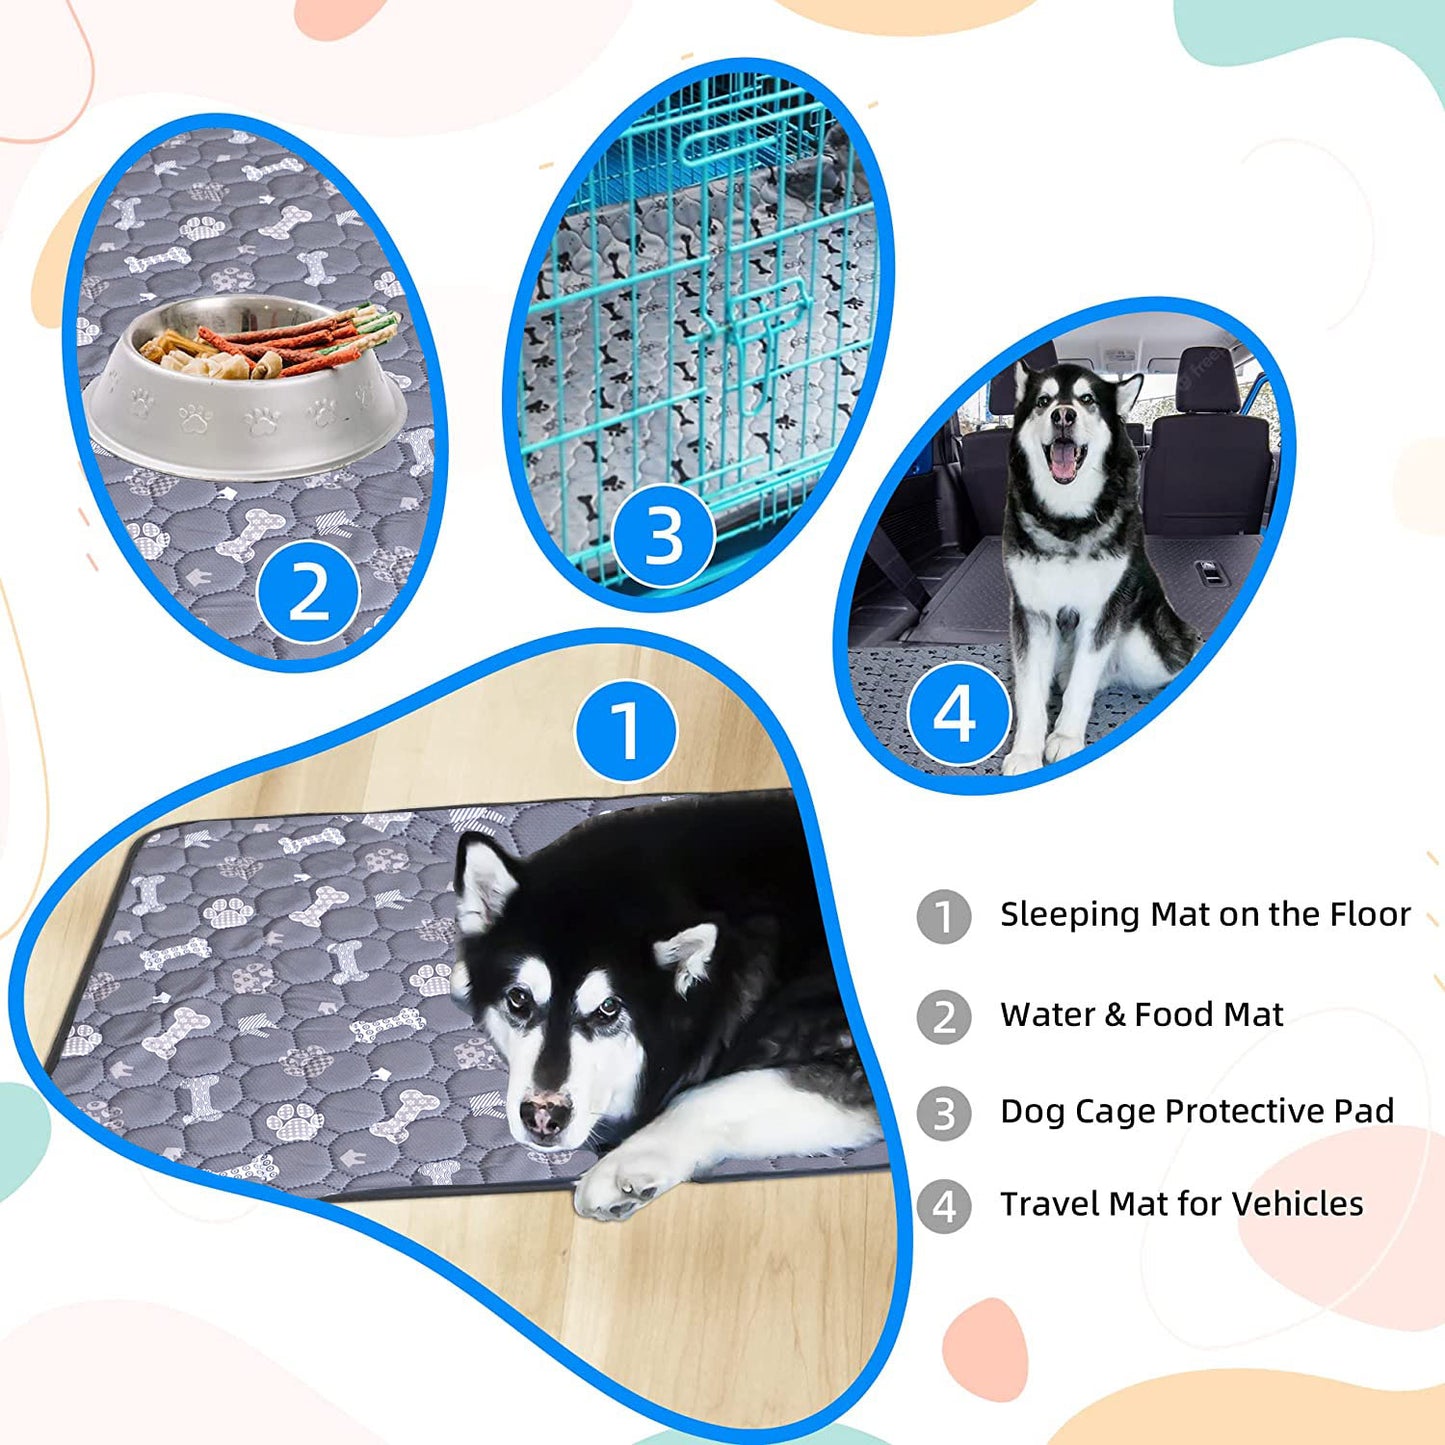 4 Layer Washable Dog Pee Pad, Pet Cat Training Pads, Reusable Puppy Whelping Pads,Protective Non-slip Blanket Mats for dog fences cage doghouse, Couch Cover, Potty training